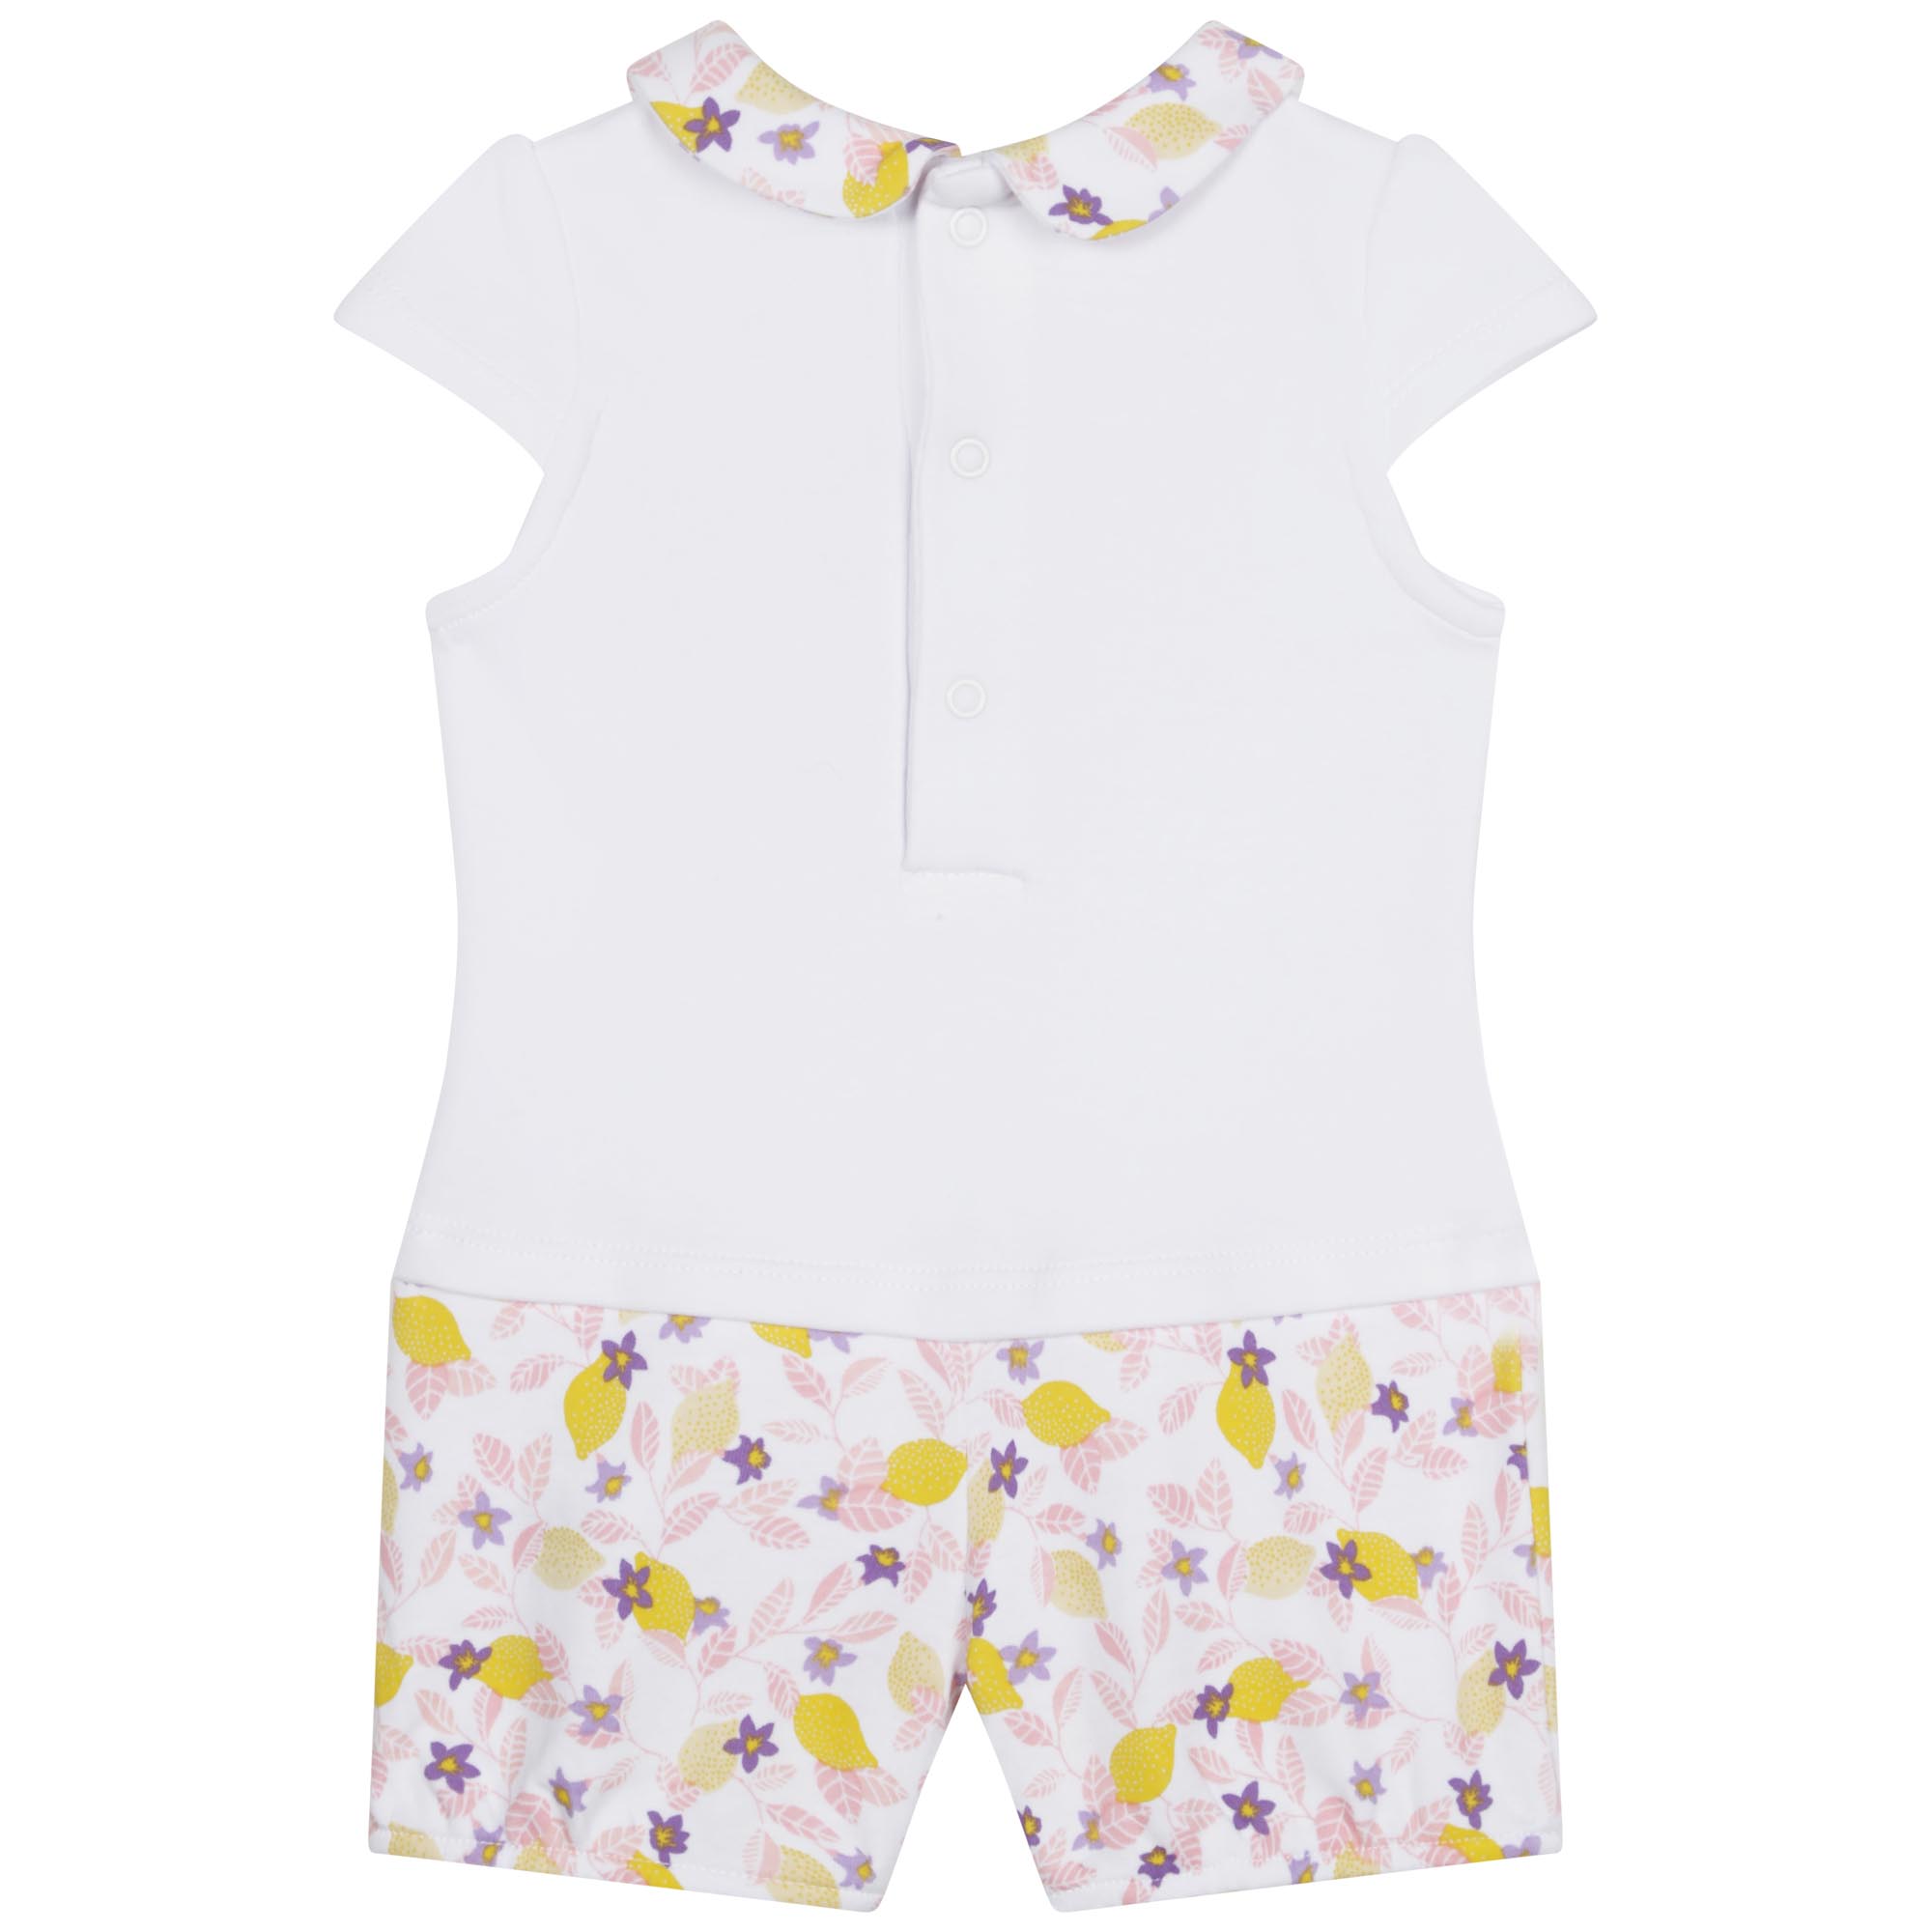 Cotton 2-in-1 playsuit CARREMENT BEAU for GIRL